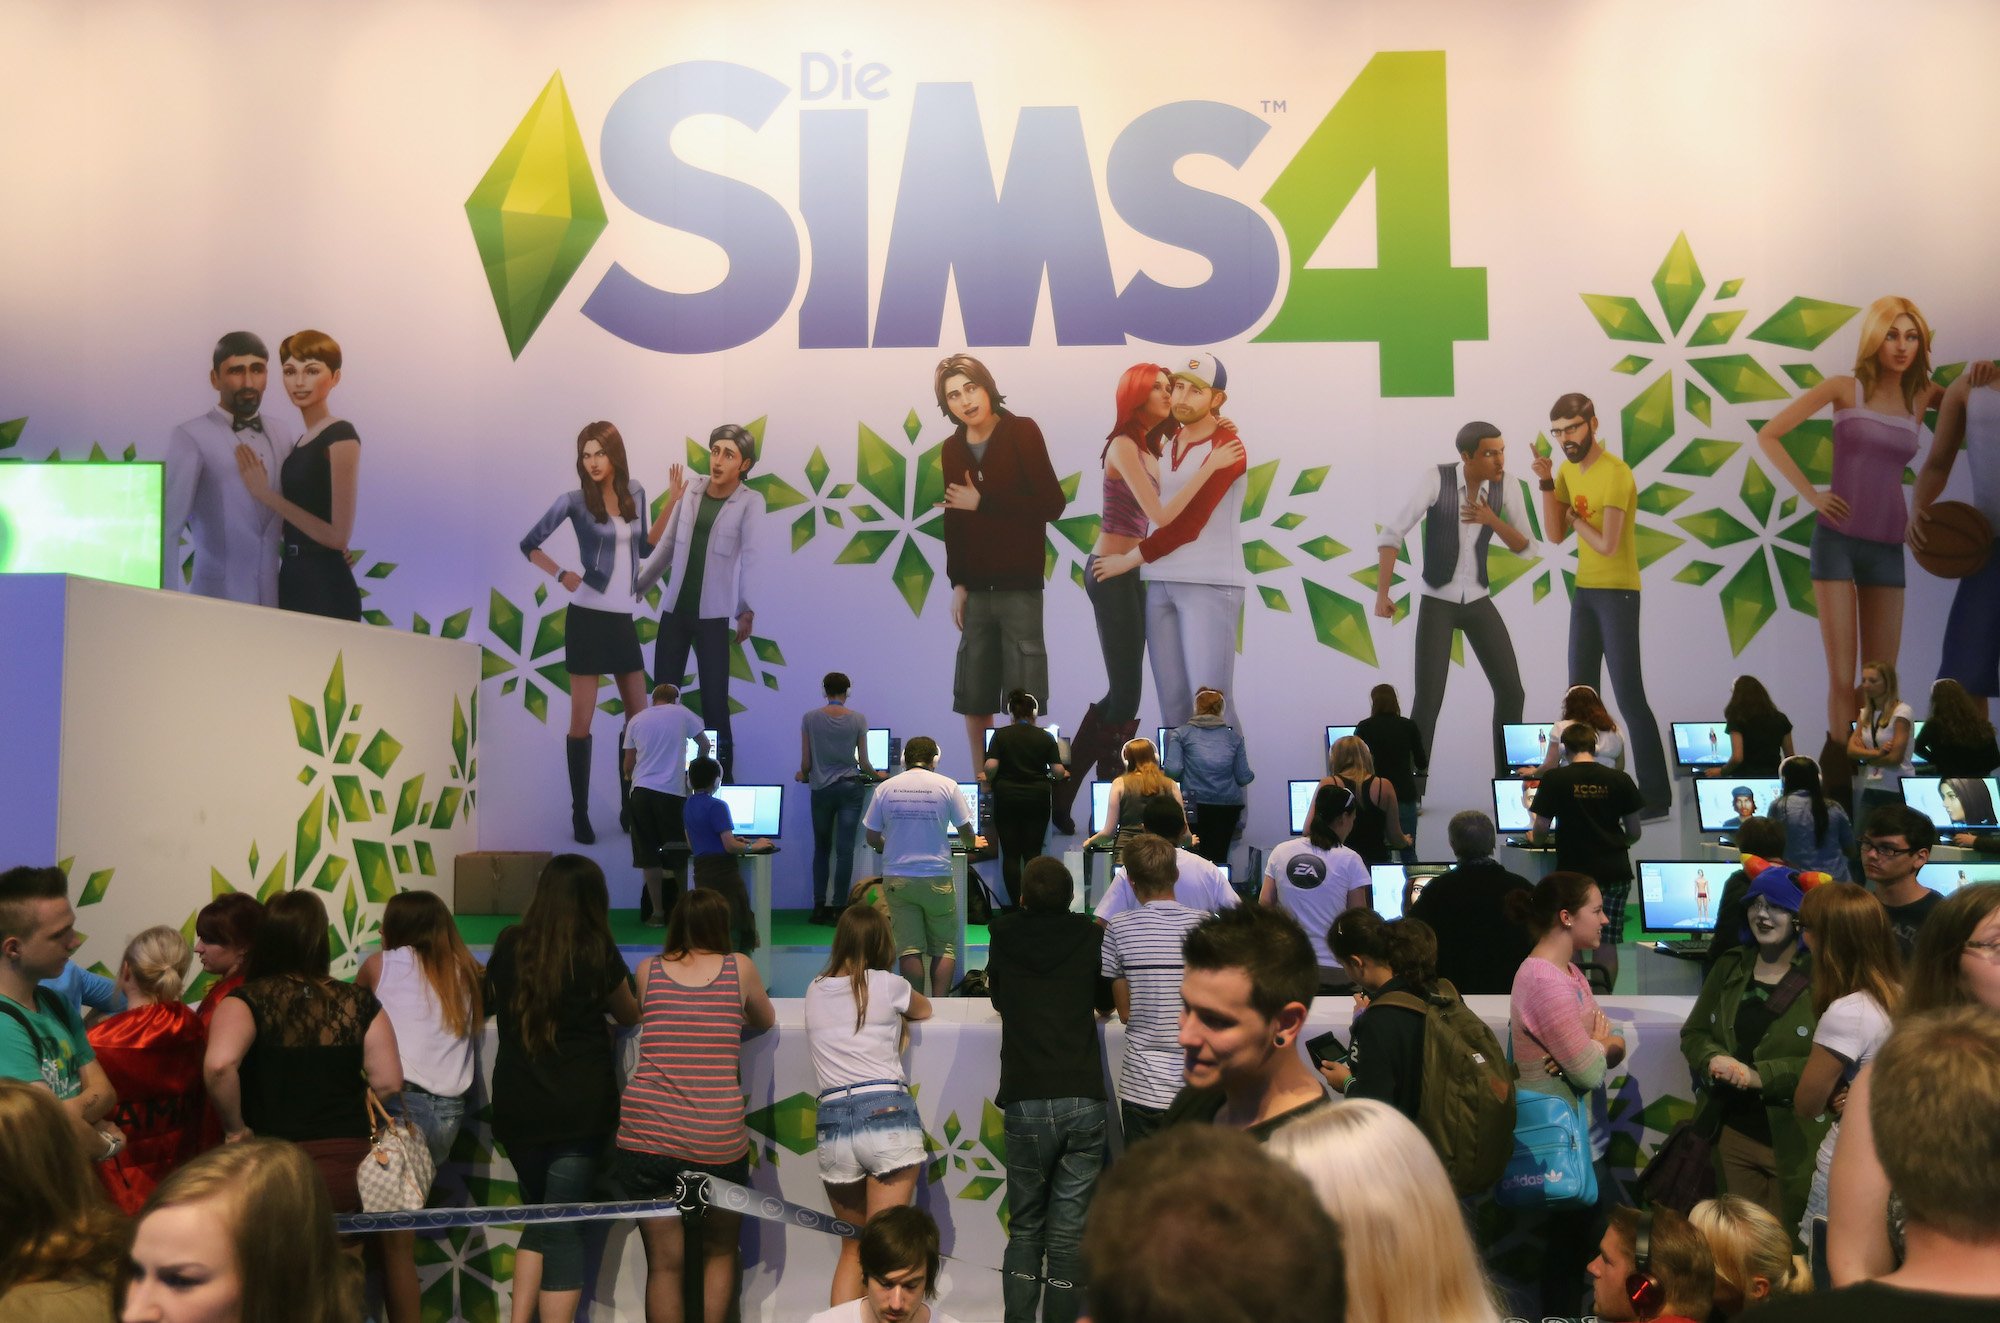 Gaming enthusiasts try out the 'The Sims 4' game on the new XBOX at the Gamescom 2013 gaming trade air on August 22, 2013